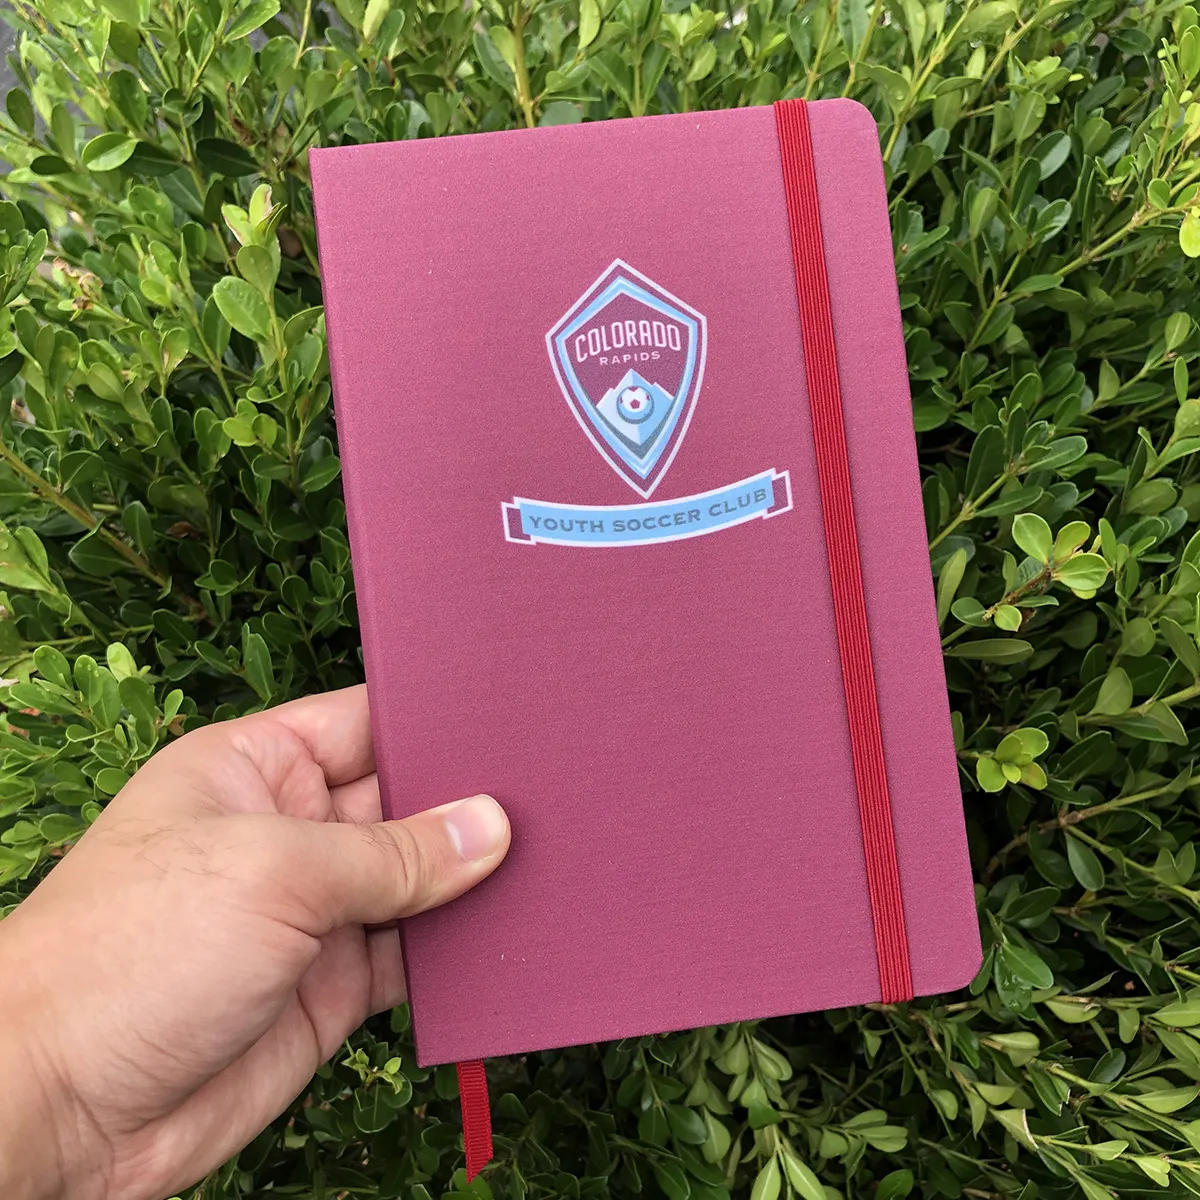 Custom printing notebook fabric hardcover youth soccer club company stuff notes journal